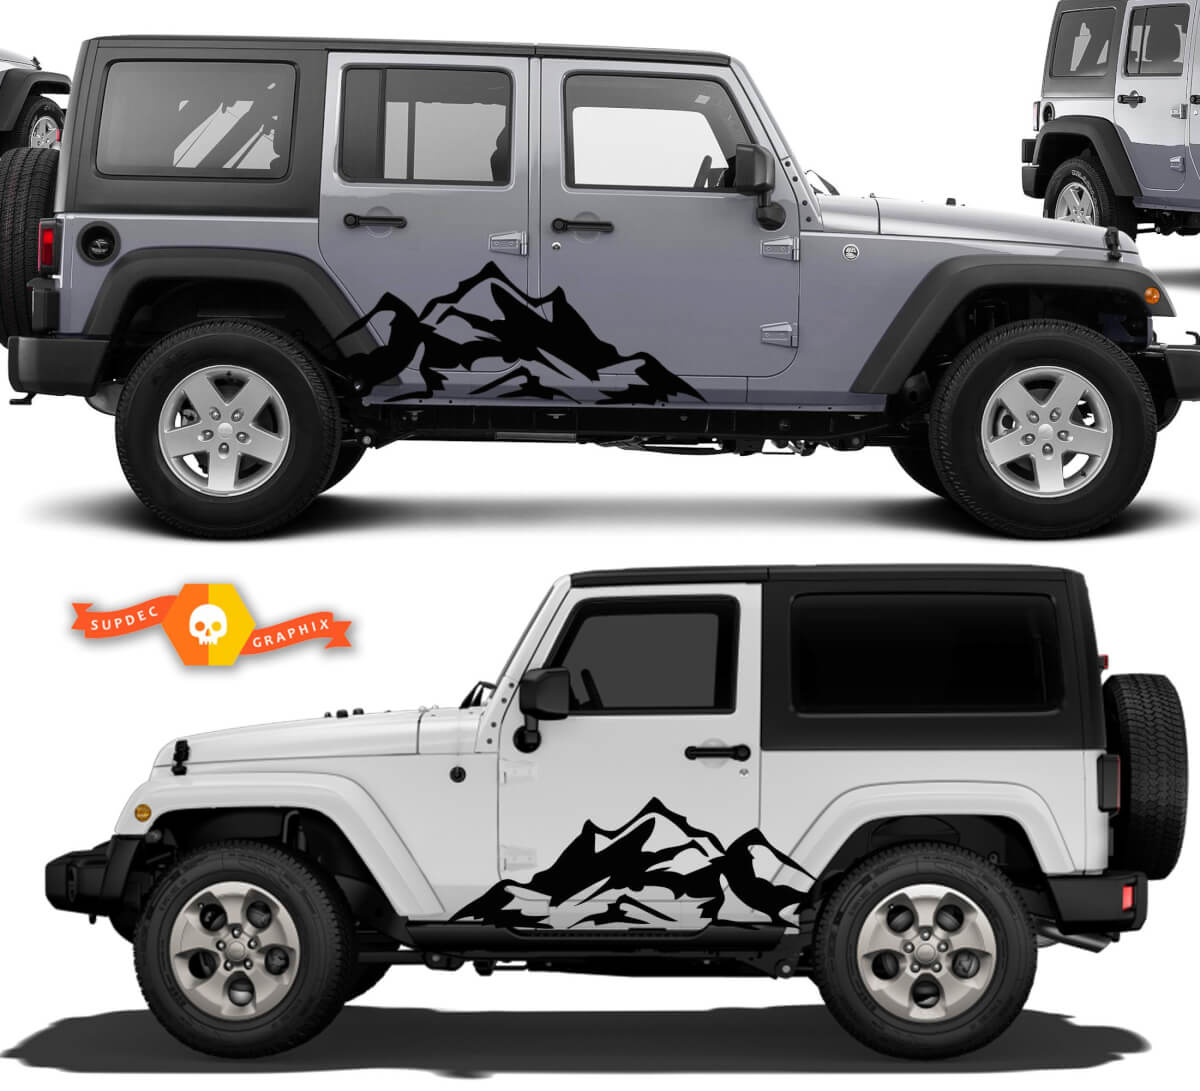 2ST MOUNTAIN Fender Side Decal Sets Graphic JEEP WRANGLER RUBICON SAHARA n1